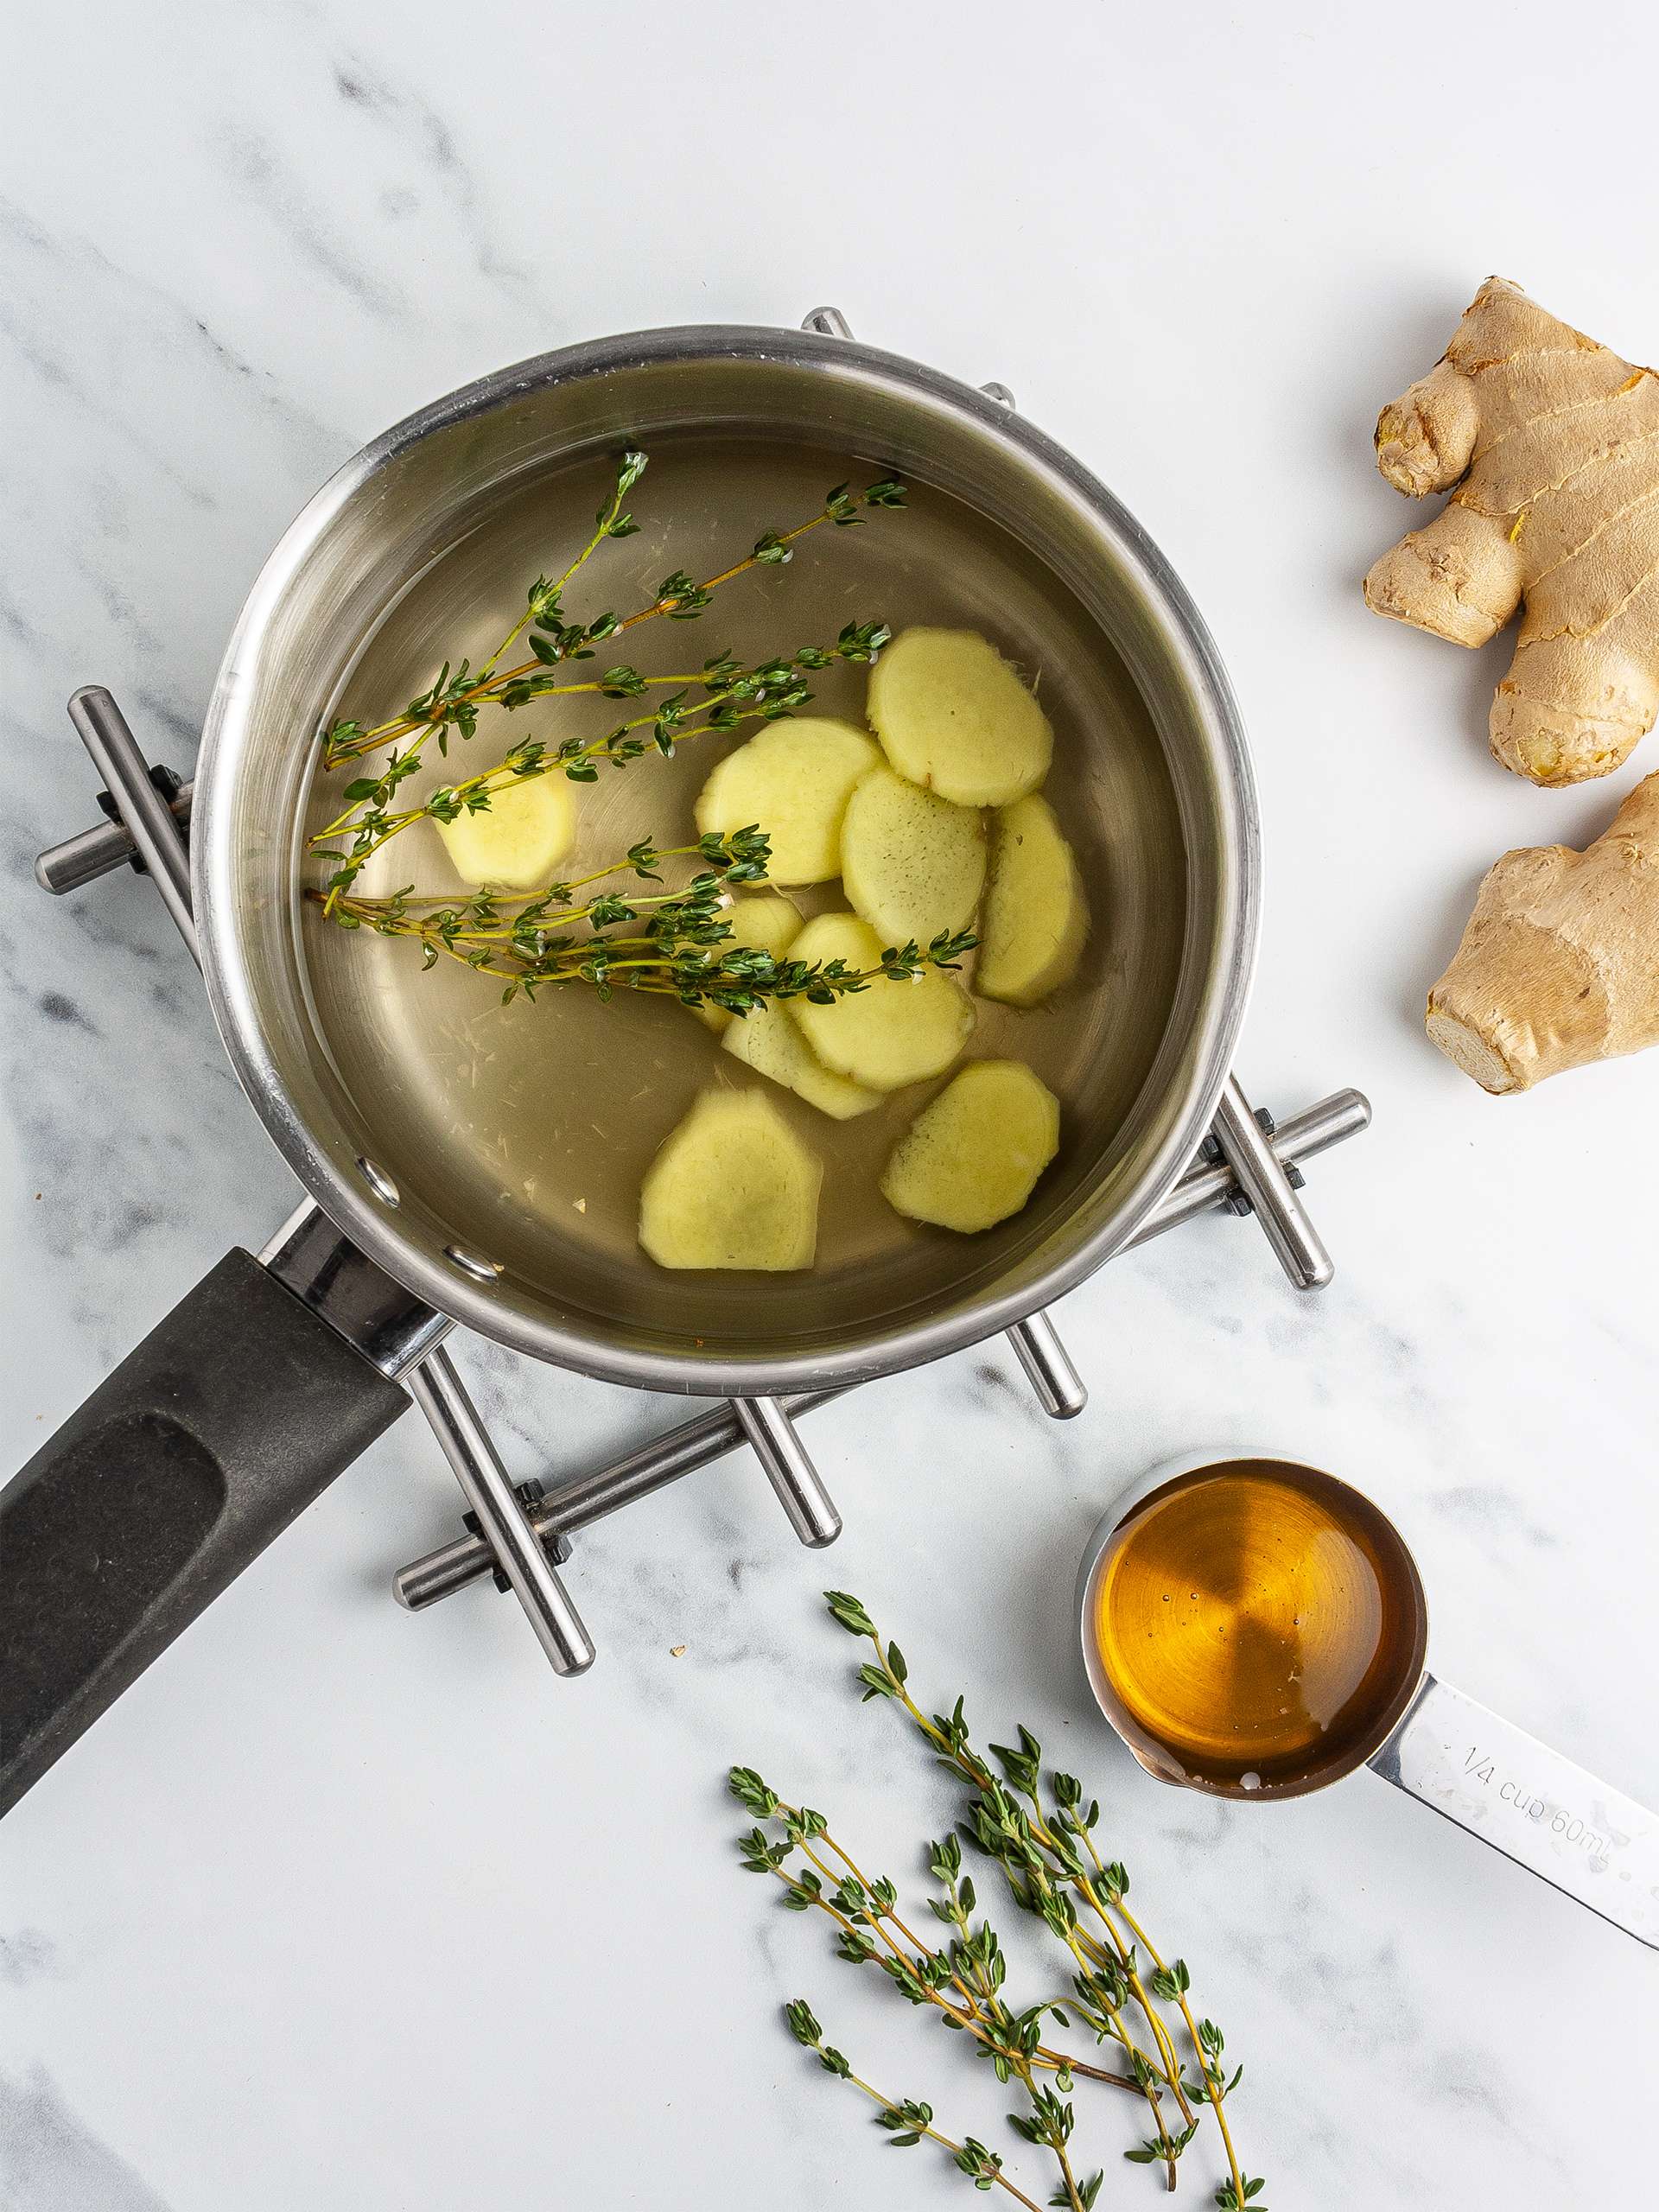 Ginger root tea with honey and thyme